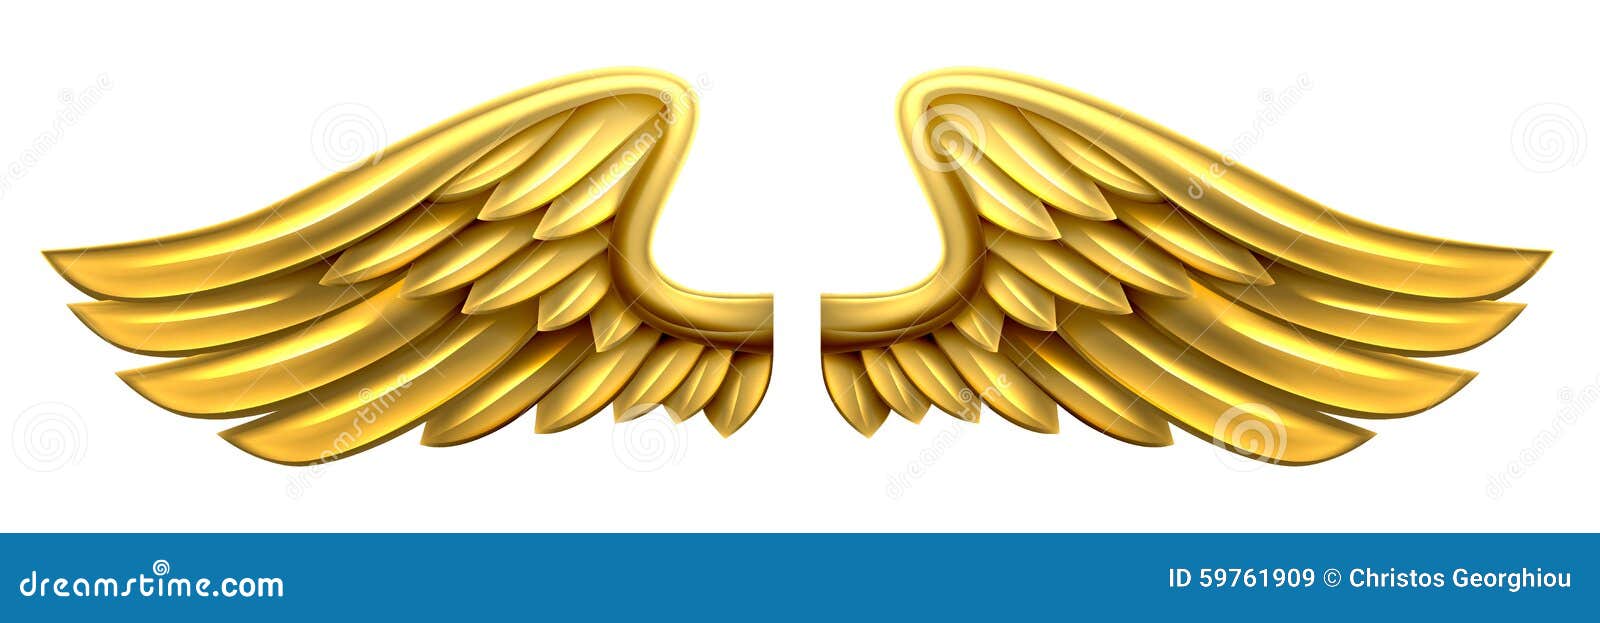 Metal Gold Wings stock vector. Illustration of angels - 59761909